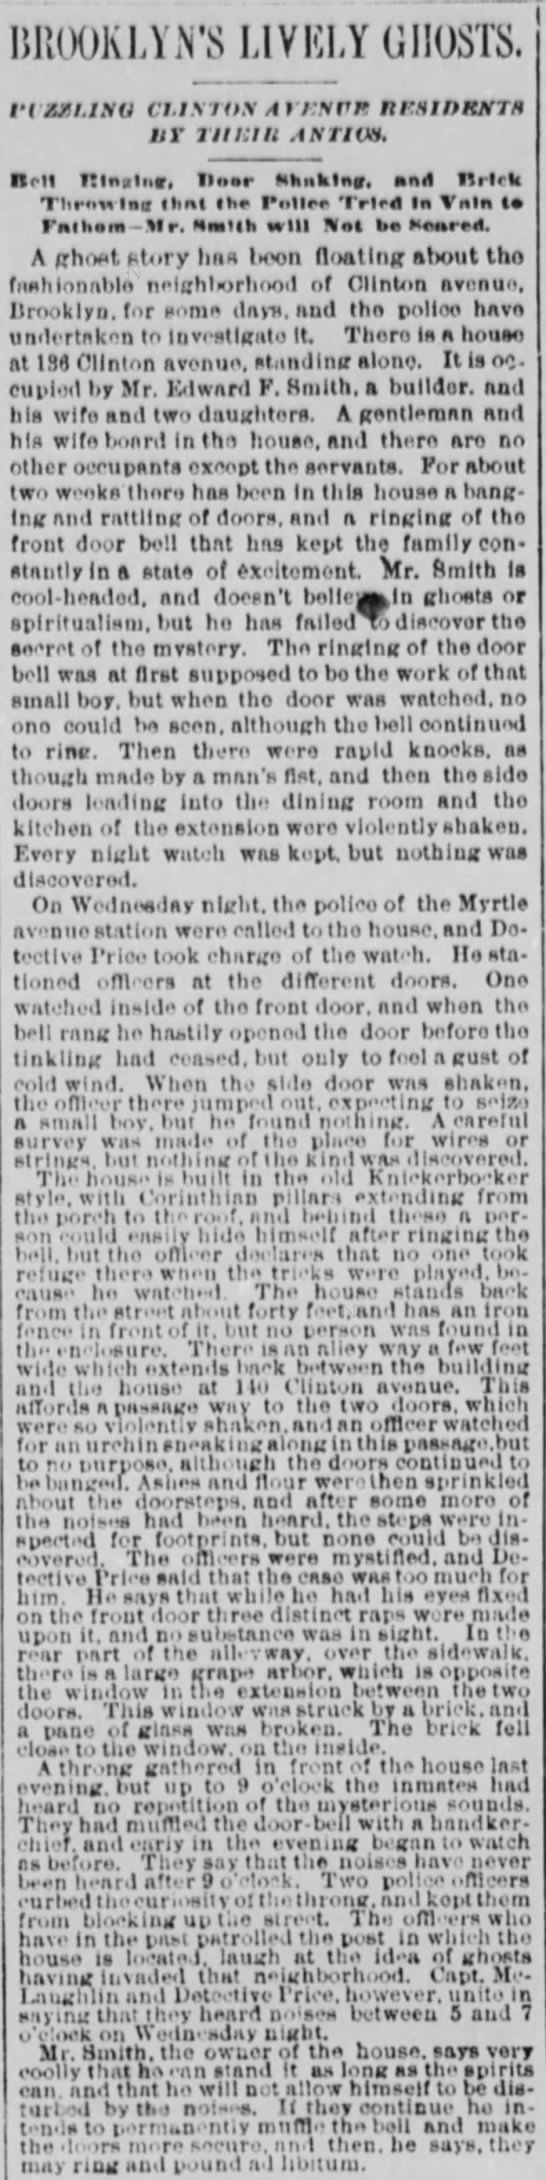 "Brooklyn's Lively Ghosts Puzzling Clinton Avenue Residents by Their Antics" (1878) - 